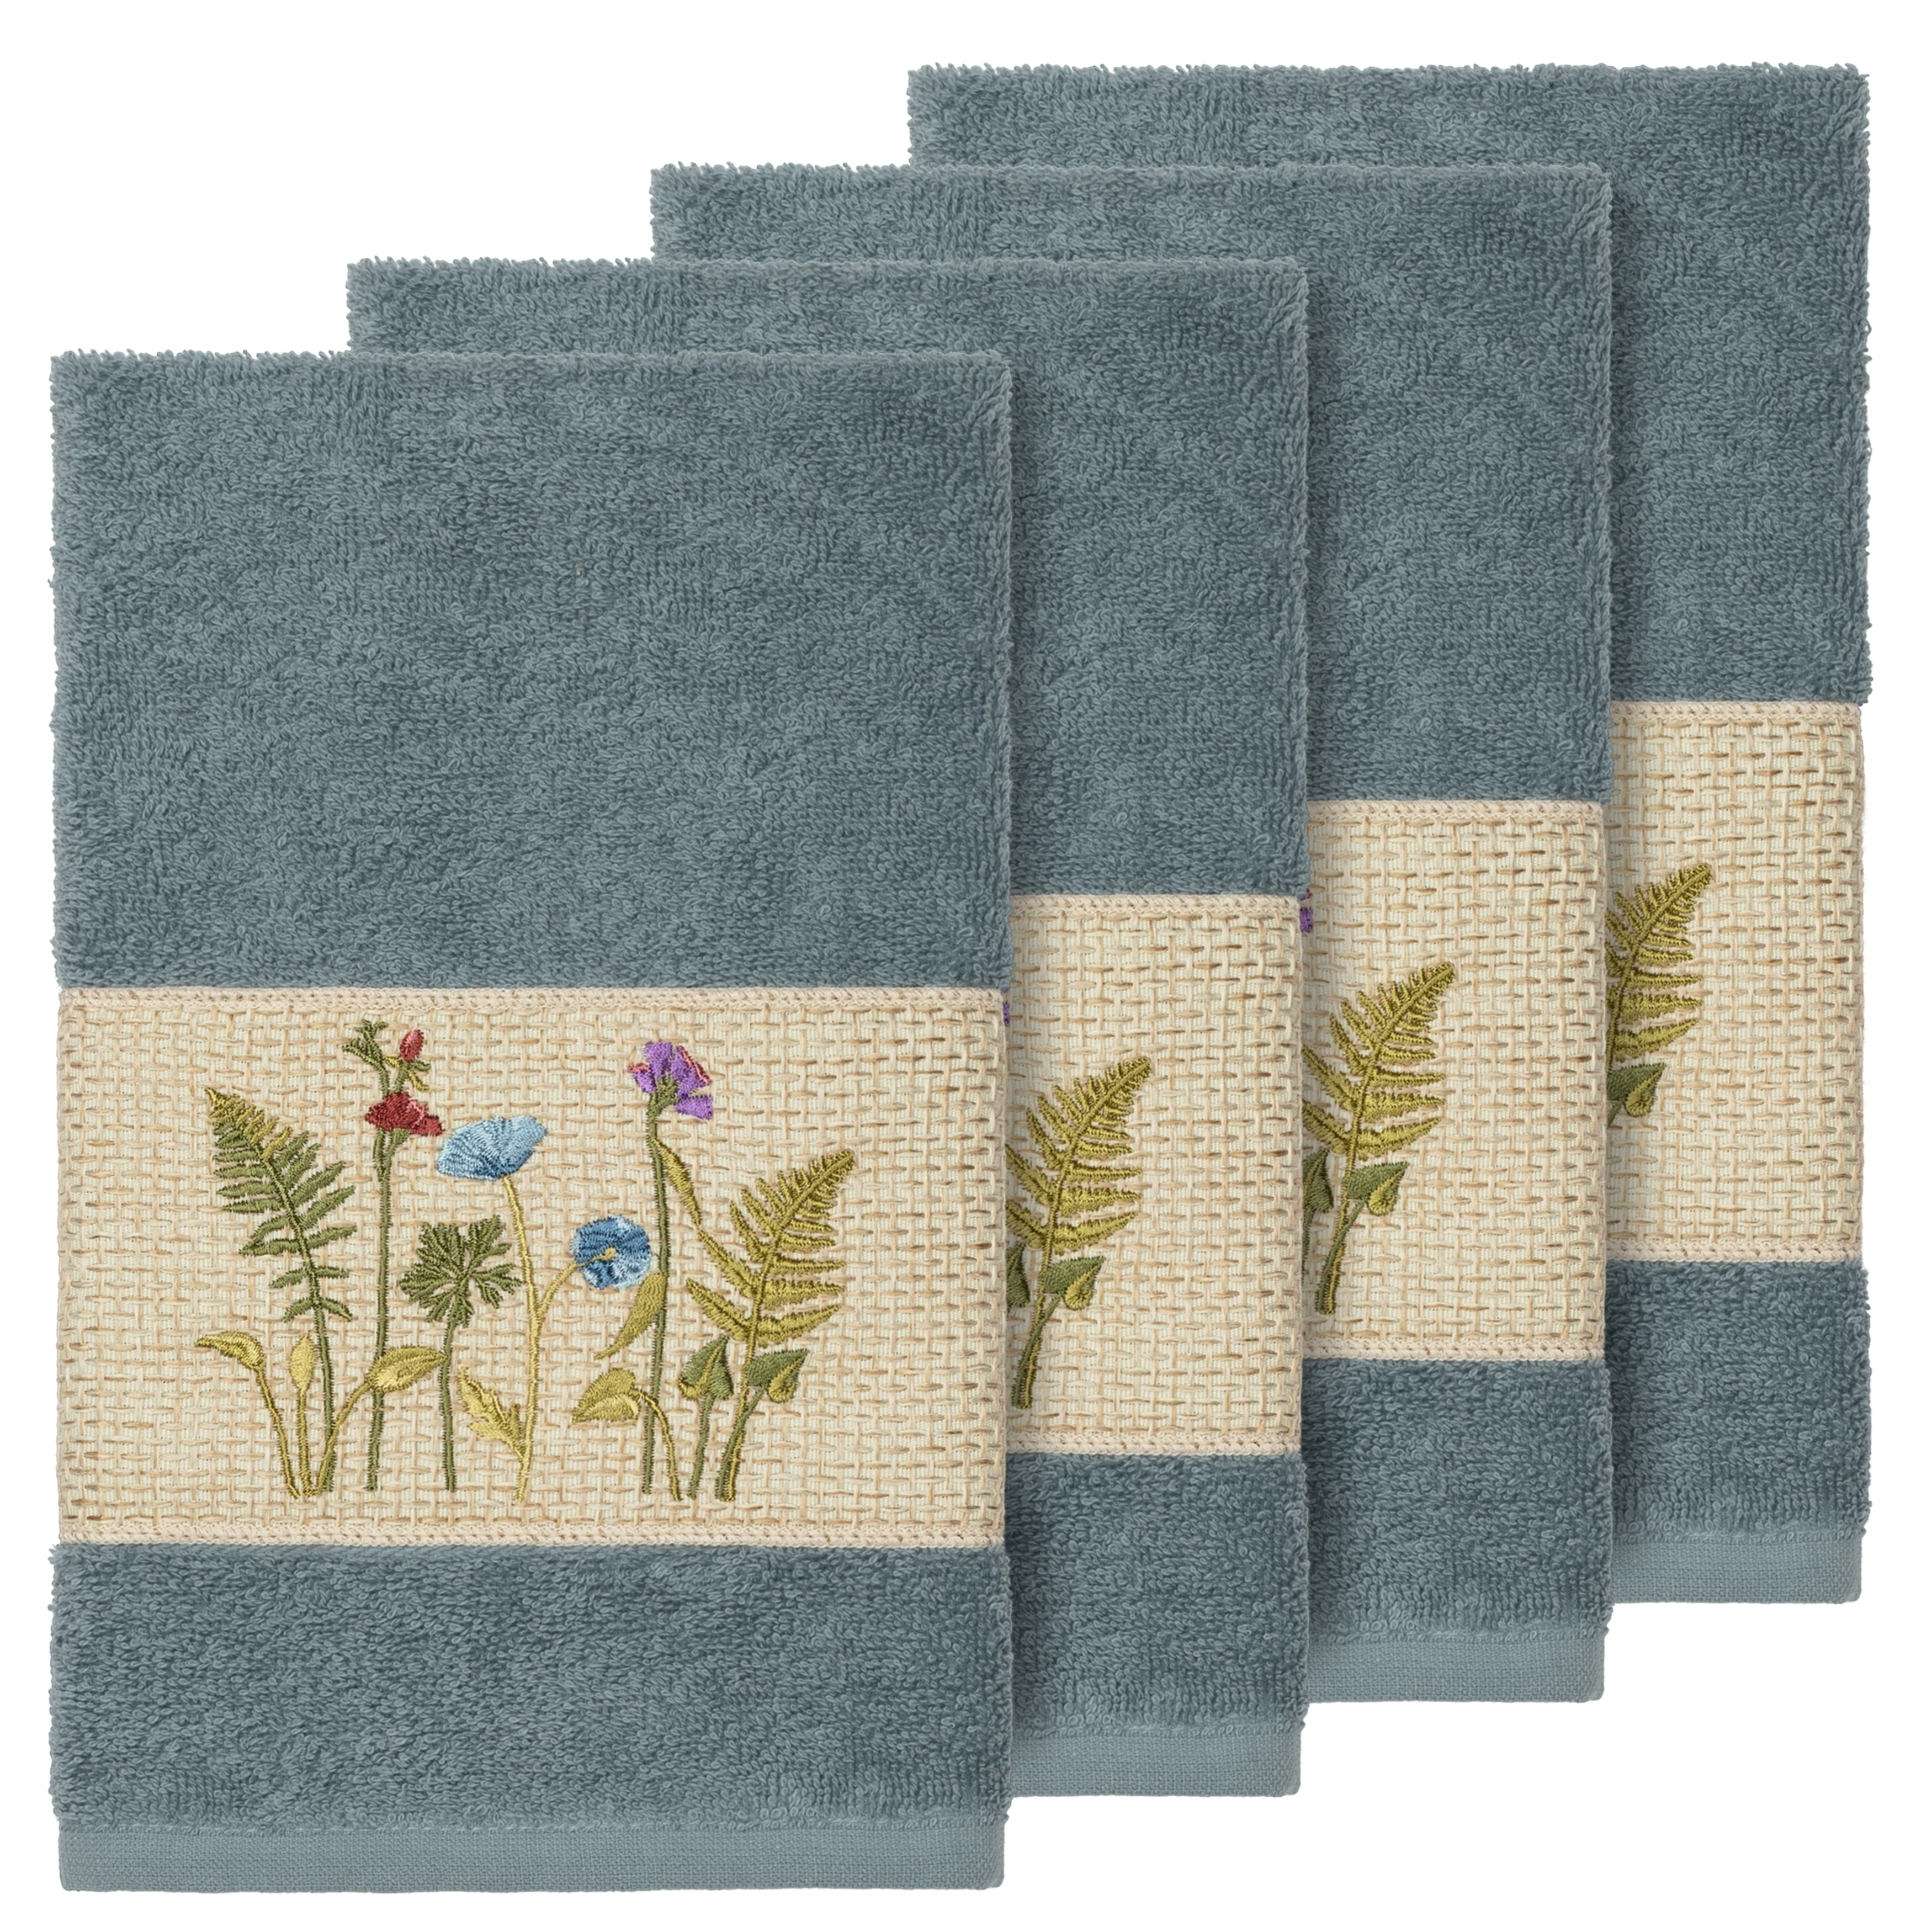 https://ak1.ostkcdn.com/images/products/21156577/Authentic-Hotel-and-Spa-Teal-Blue-Turkish-Cotton-Wildflowers-Embroidered-Hand-Towels-Set-of-4-ff9631f6-feb7-4e80-a1b7-307e033d13e2.jpg